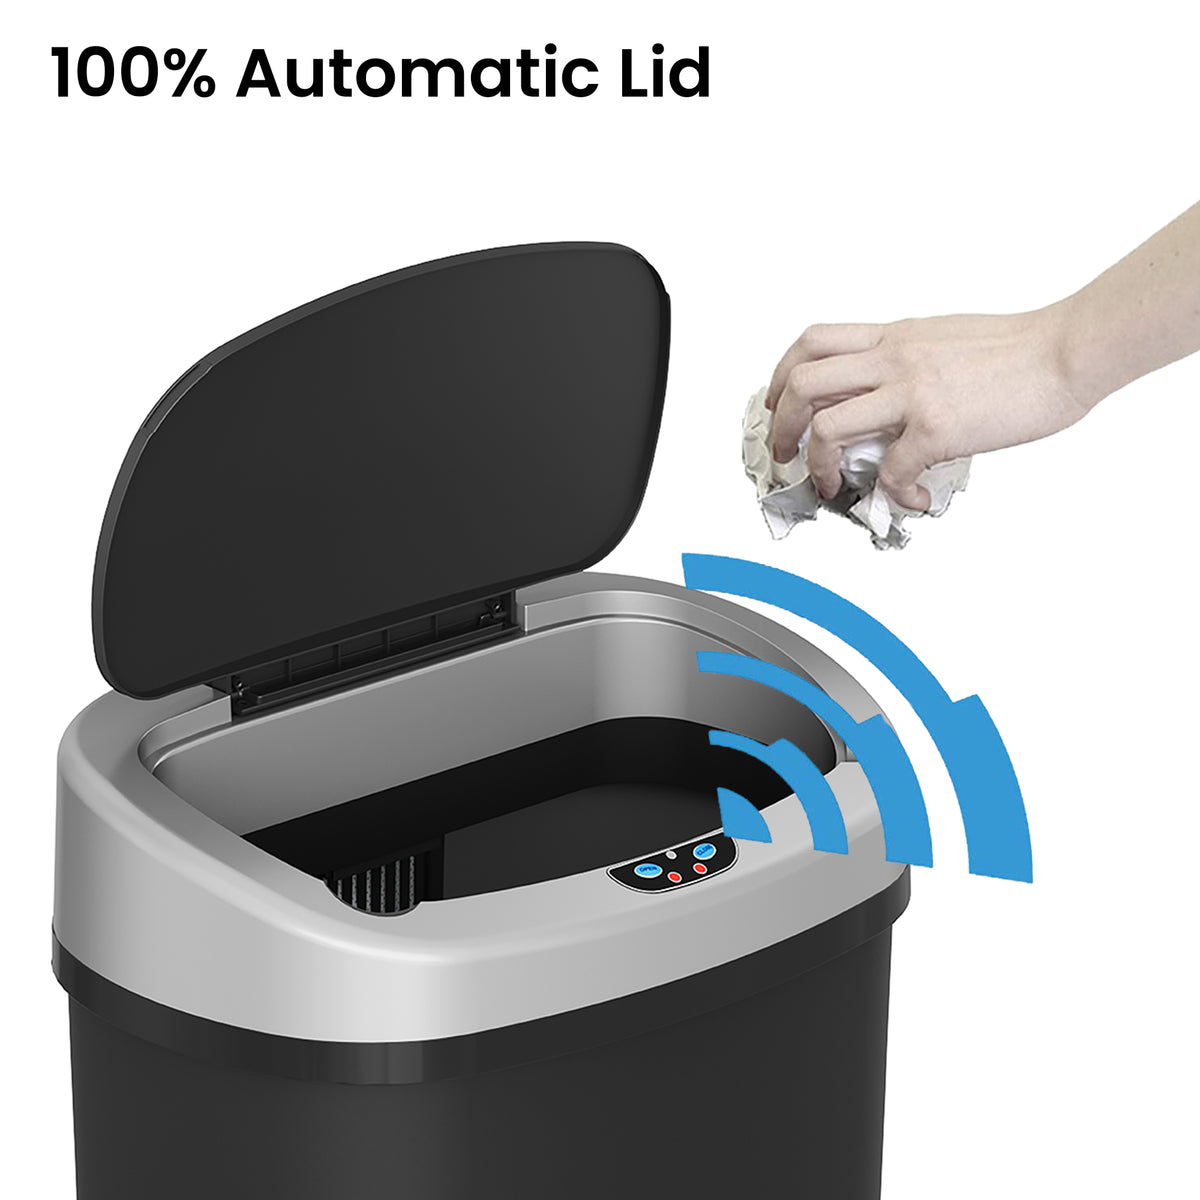 13 Gallon Oval Plastic Sensor Trash Can with AbsorbX Odor Filter 100% automatic lid